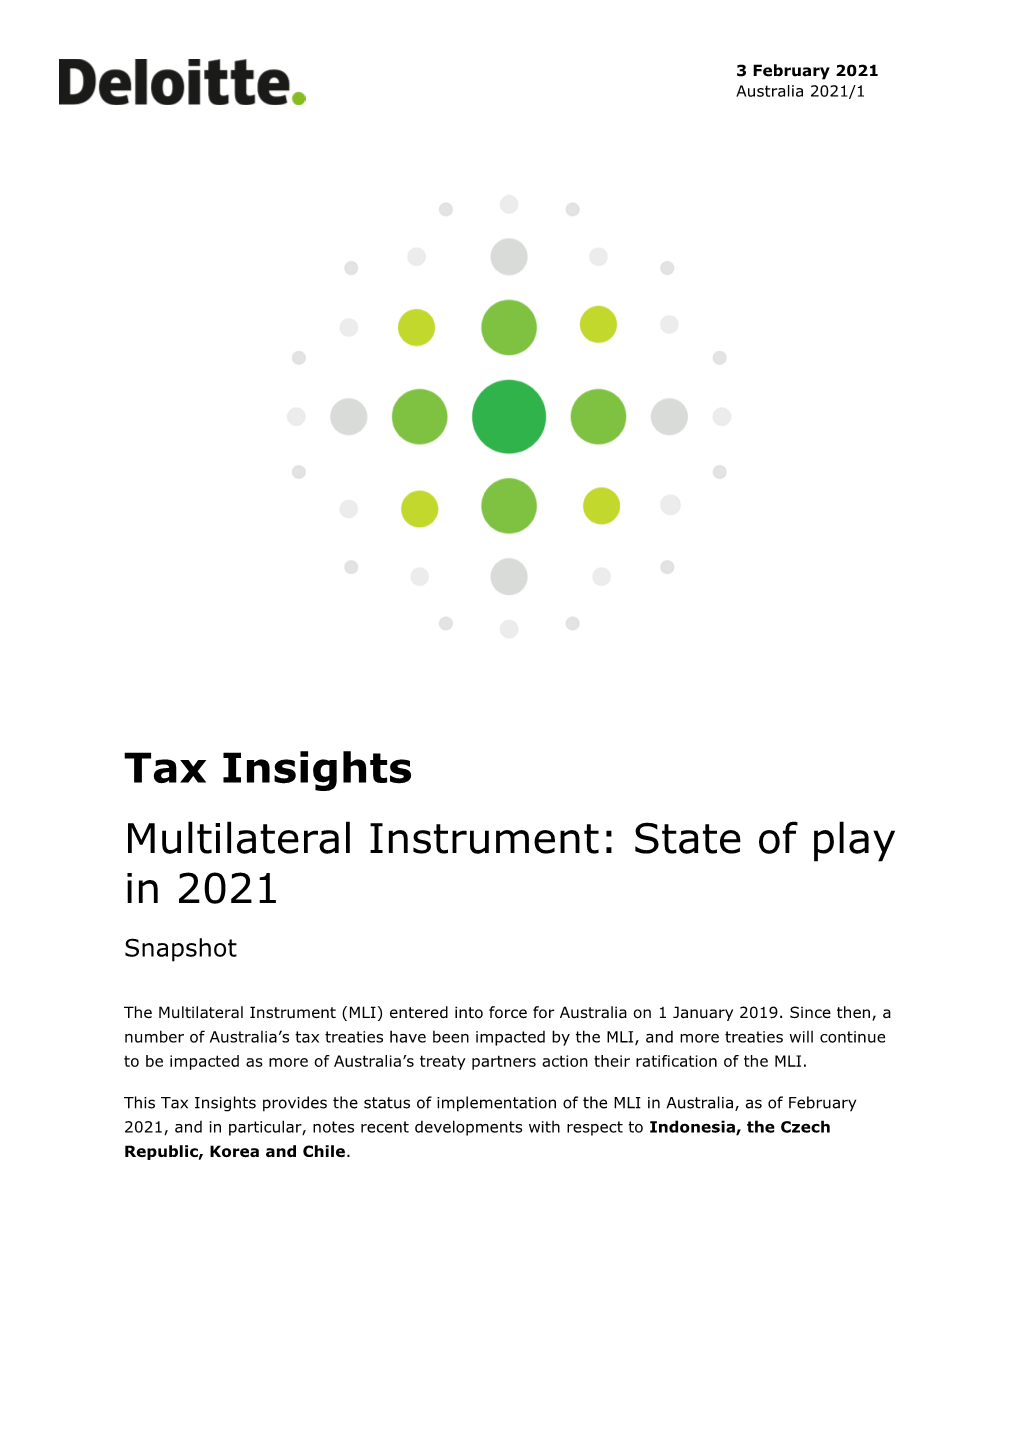 Tax Insights Multilateral Instrument: State of Play in 2021